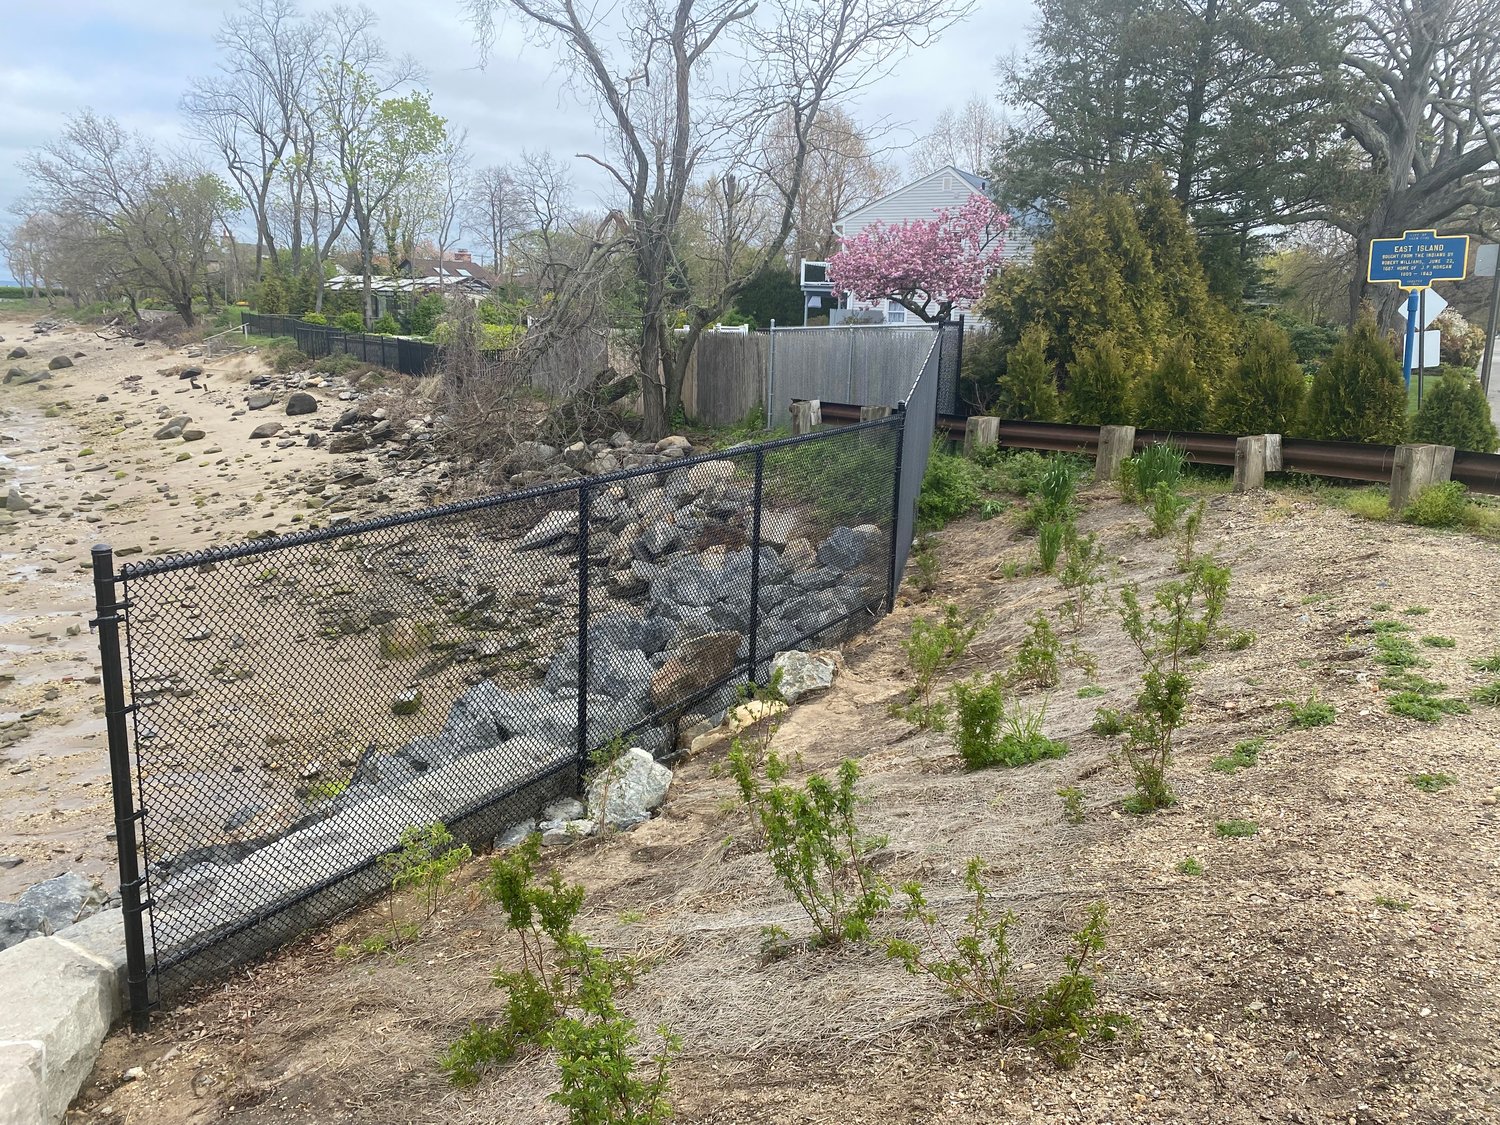 An illustration of the shore of Dosoris Pond, below right, looking toward the Long Island Sound, at low tide. The shoreline below the fence belongs to the state and is open to the public.fence involves negotiating the shore wall and climbing down the rocks below.